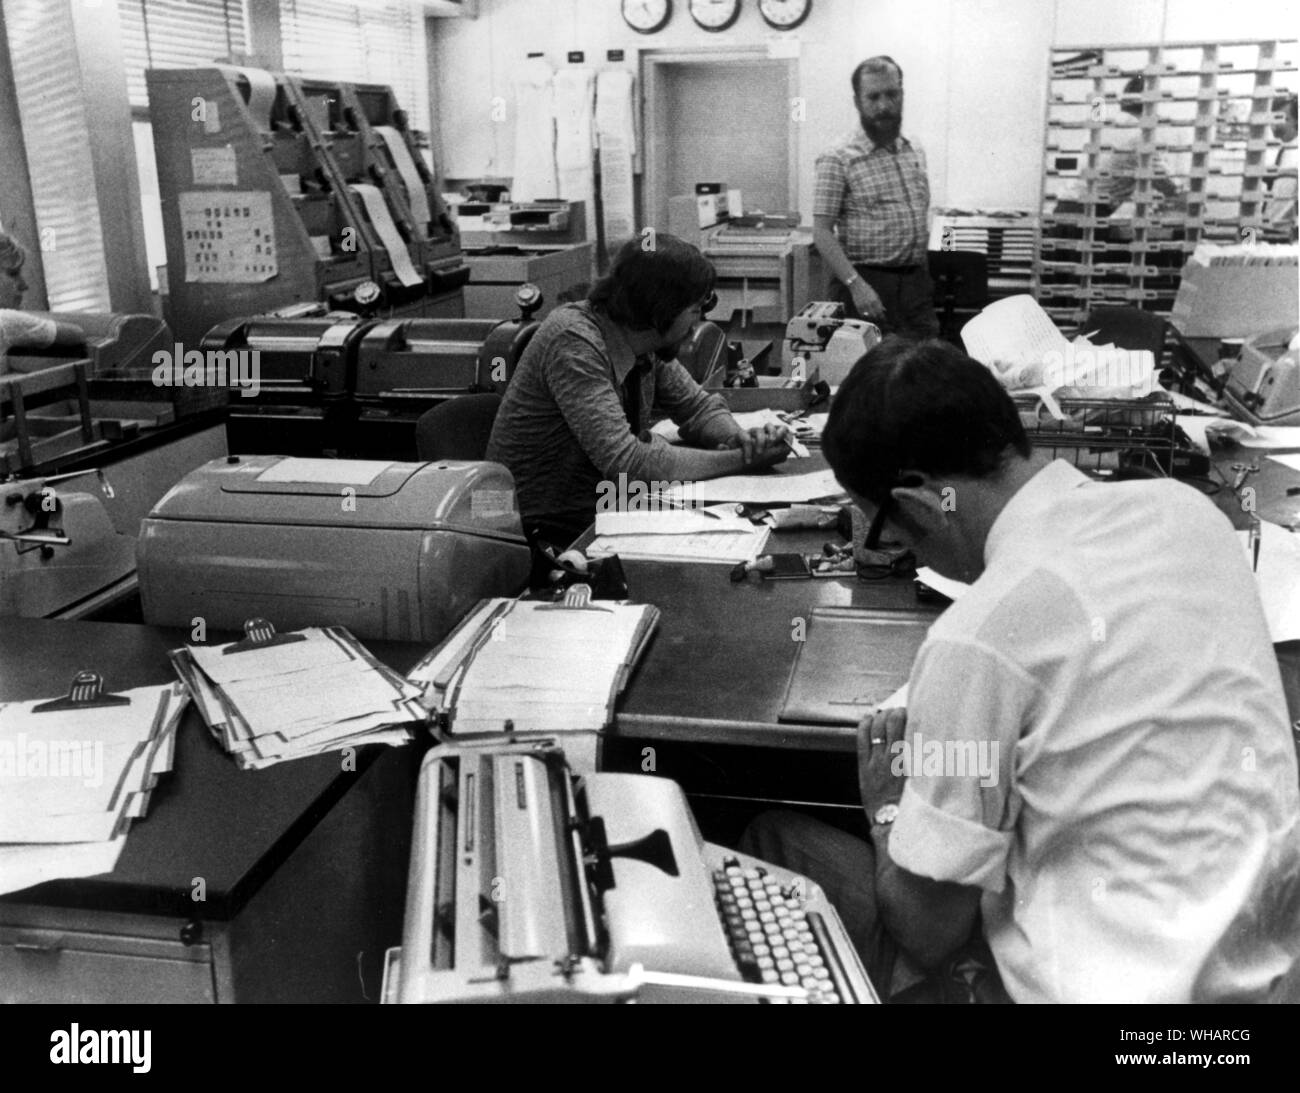 A view in the newsroom of Radio Free Europe in Munich, Germany, where news from all over the world is gathered and edited. 7th June 1971 Stock Photo